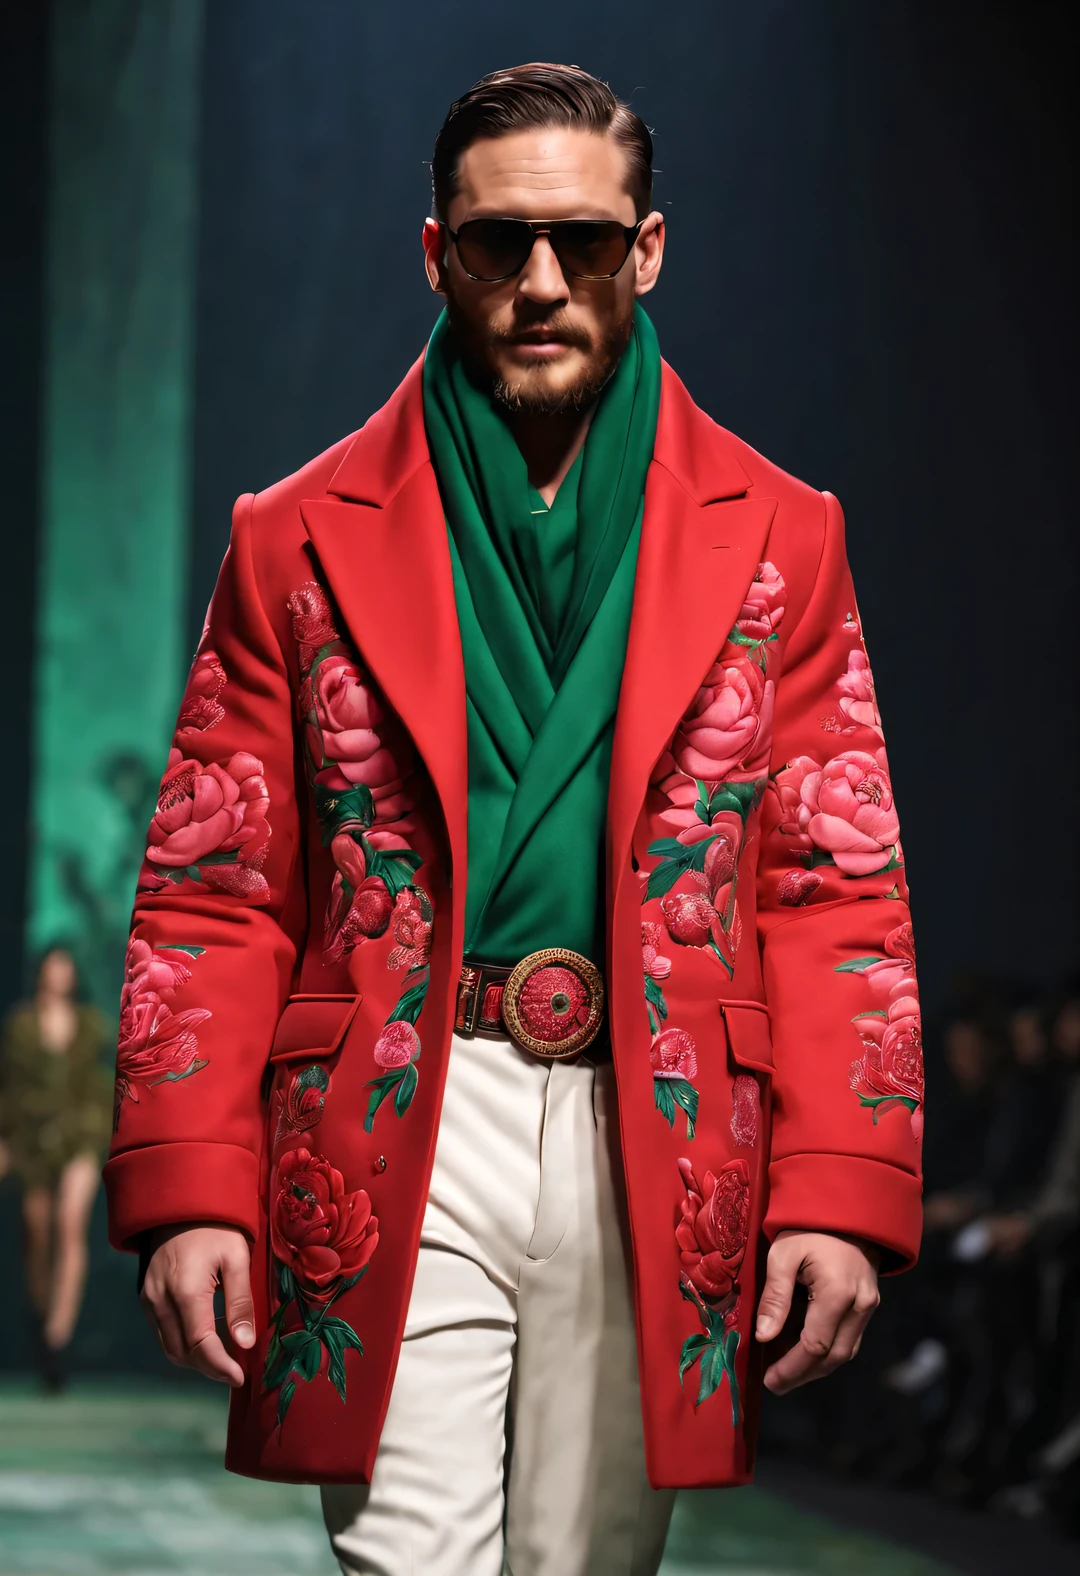 On the fashion show, Tom Hardy, Tall fit male model, (Wearing a thick cotton coat made of red and green peony cloth: 1.34), (Extra long cotton military coat: 0.65), Has warmth、Windproof cotton coat, peony flower, Leaves, Embroidery with Suzhou red and green peony pattern as the theme, (Tan fur coat collar), (tibetan shaman jewelry), complex mixed styles, (Gentlemanly manners), Embroidered Su Embroidery Big Red Parka Snow Coat, (exceed) coat jacket, (big duckbill hat), (Black Sweater), jeans, (winter scarf warm scarf), gloves gloves, belt, Cotton boots, sunglasses, Combat boots, sports shoes, big photography, background: Indoor T-shaped track, T-shaped platform, (snow), depth of field, Ultra-clear, super high quality,